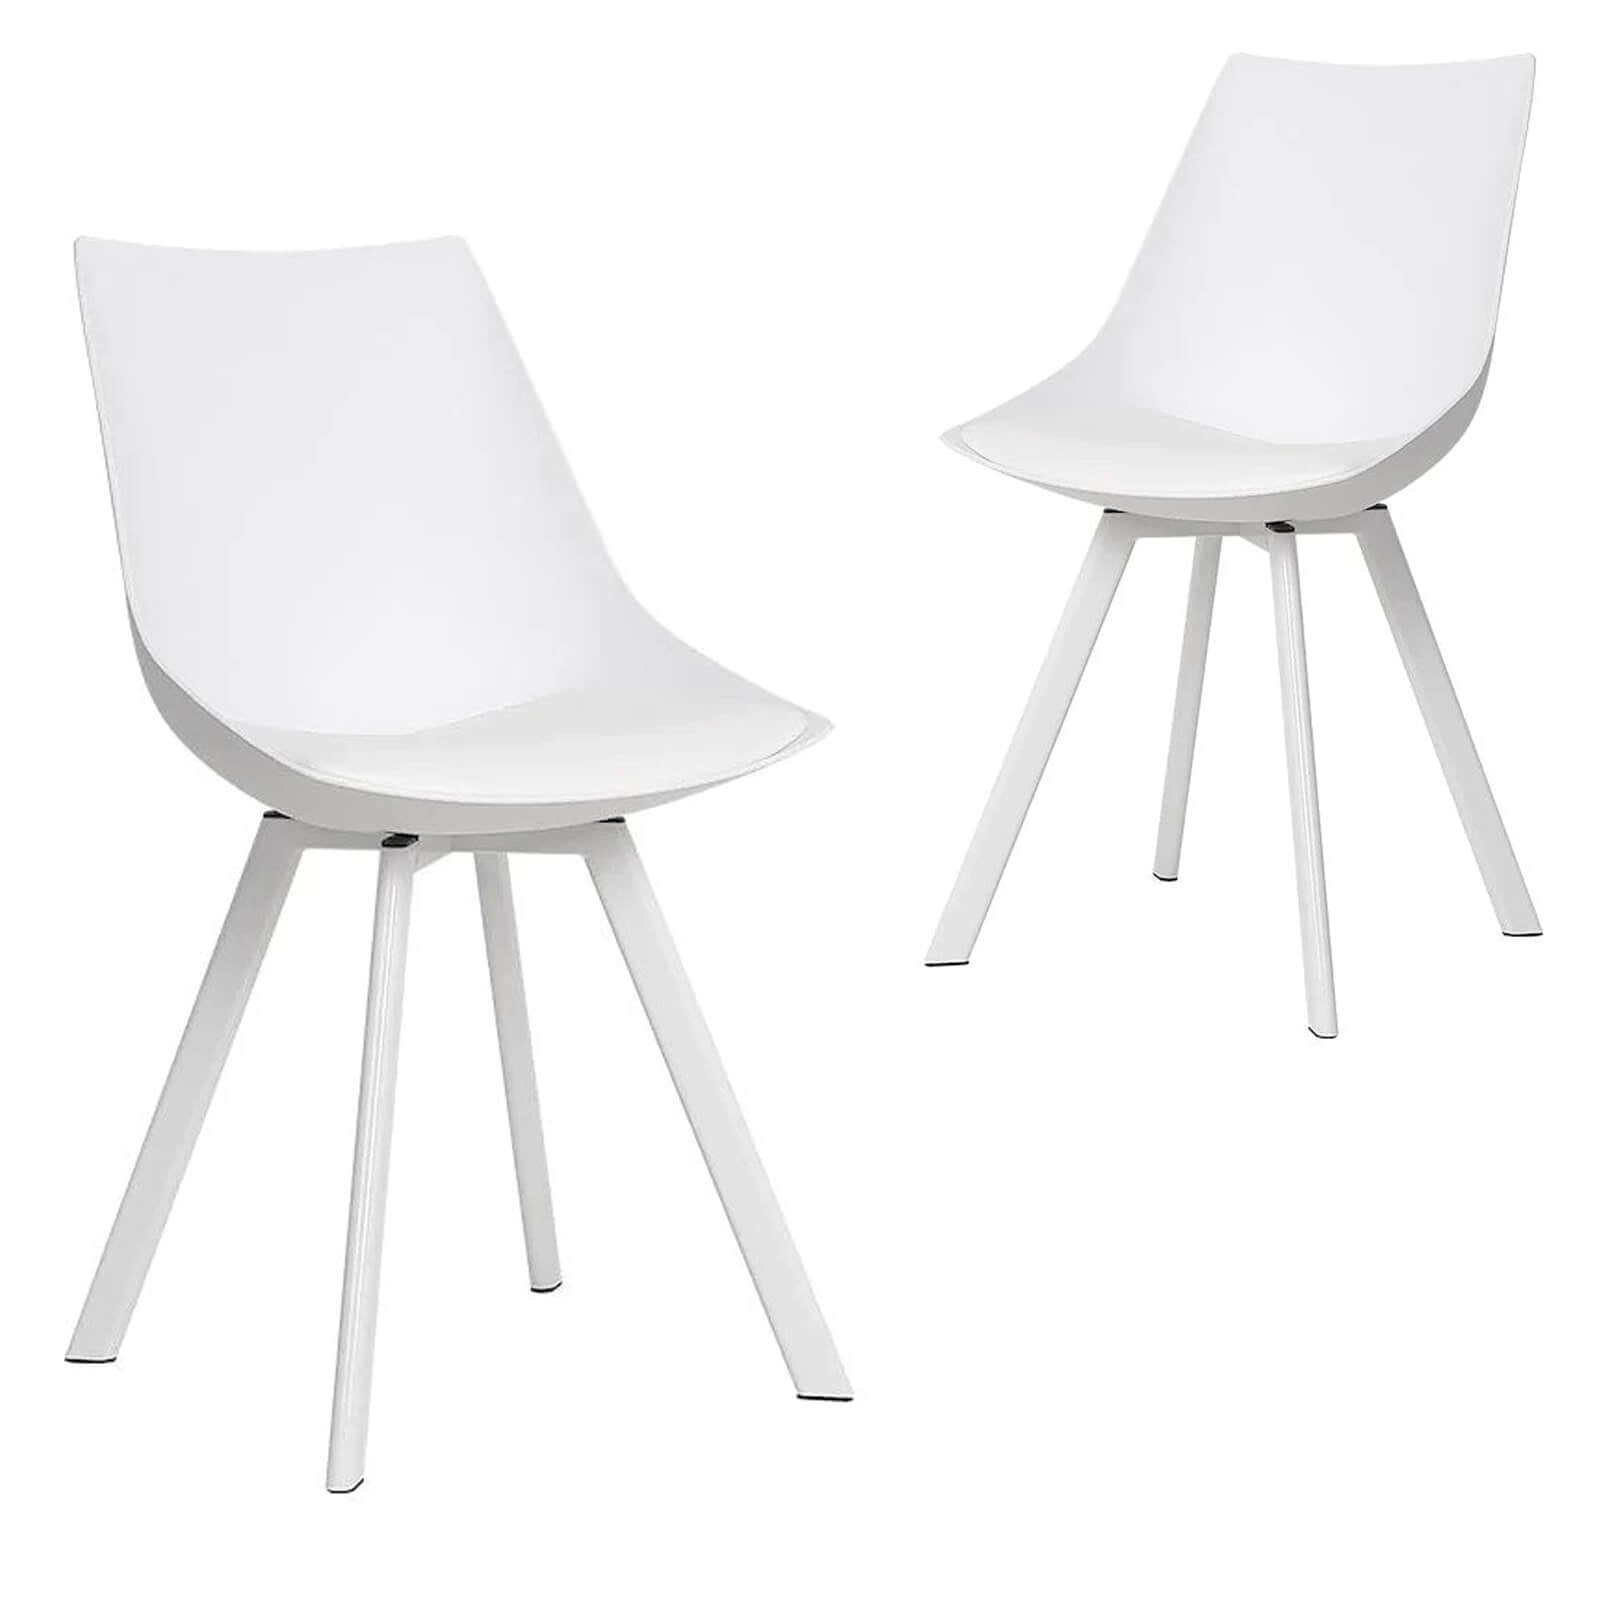 Lonsdale | Black And White Plastic PU Leather Dining Chairs | Set Of 2 | White